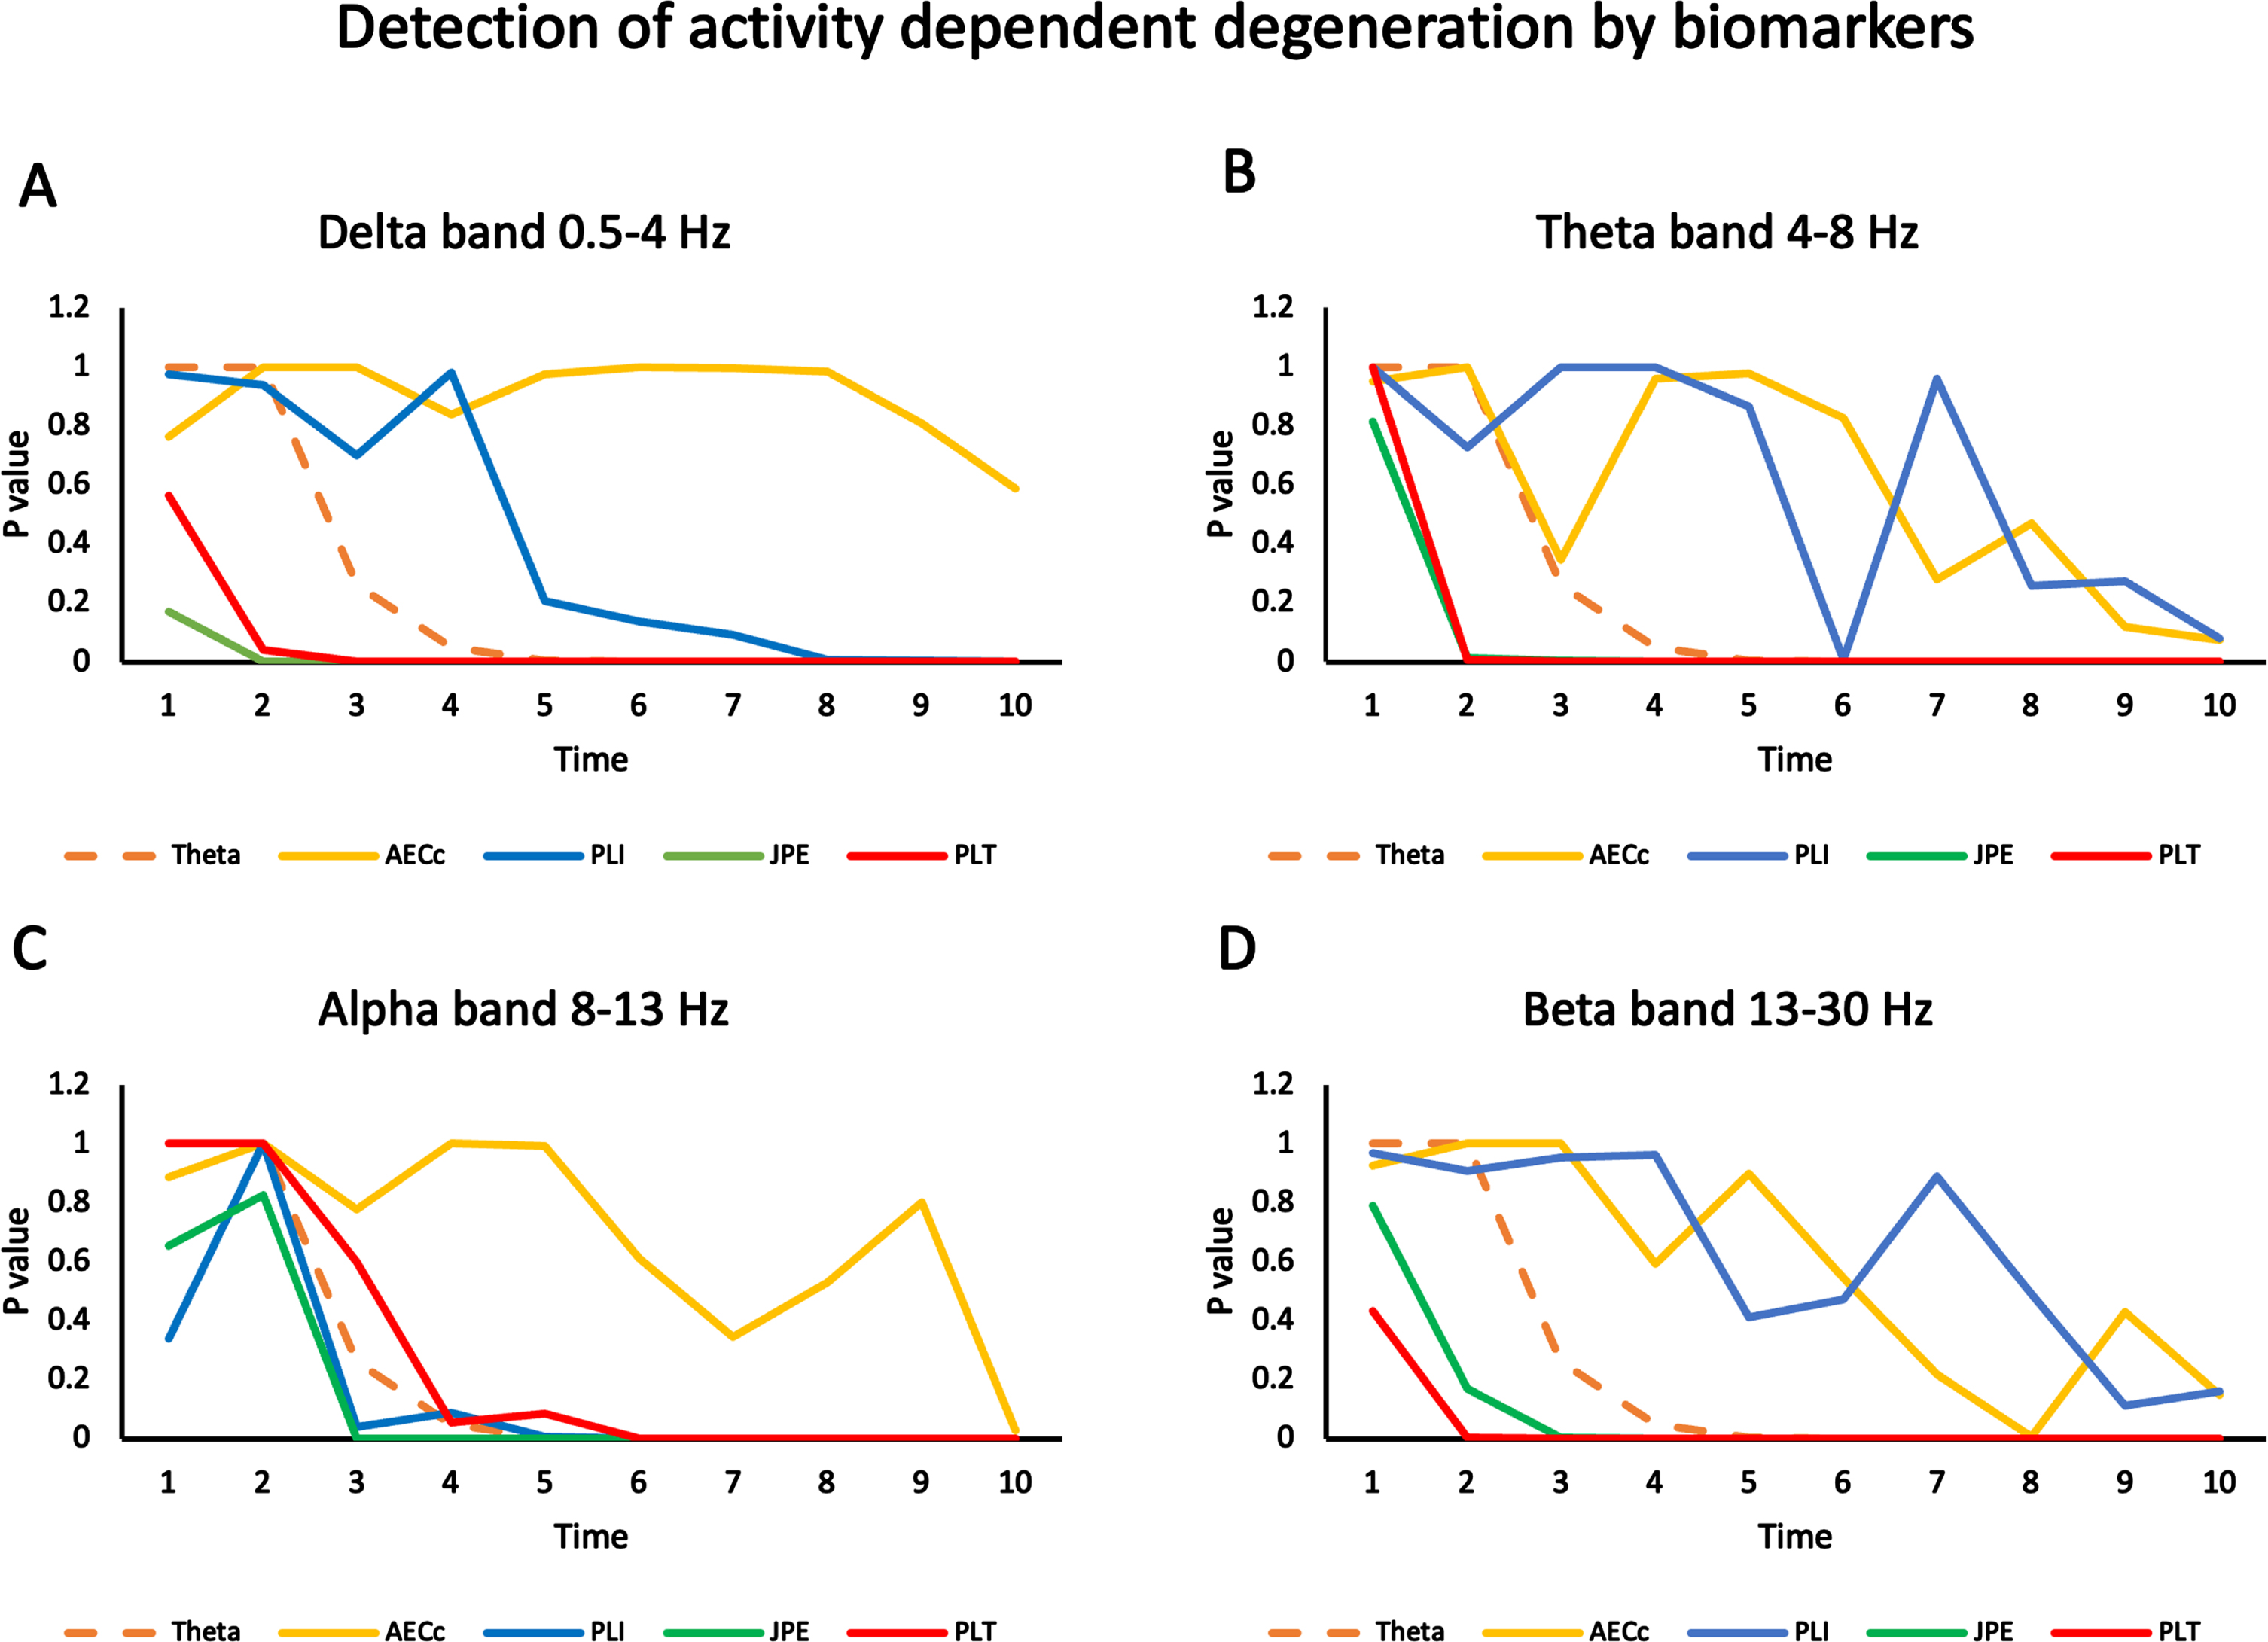 Sensitivity of biomarkers to detect progressive changes over time in ADD model. Statistical differences in several biomarkers (relative theta power, AECc, PLI, JPE, and PLT) are computed for two data sets (ADD: 20 files corresponding to separate runs of the ADD algorithm and 20 files of normal activity without ADD), for time steps from 1 to 10. The significance (p-value of difference in mean over all ROIs, FDR corrected) is plotted as a function of time step for all measures and 10 timesteps in four frequency bands. A) Results for the delta band (0.5-4 Hz). Results for relative theta power are shown in all plots with a striped line for reference. AECc shows no significant results for any time step. PLI is significant from timestep 8 on. JPE and PLT are significant from timestep 2 on. B) Results for the theta band (4-8 Hz). The curves of AECc and PLI show a declining trend for later timesteps but no significant effects with the exception of the PLI for timestep 6. Both JPE and PLT are significant from timestep 2 on. C) Results for the alpha band (8-13 Hz). The AECc only shows a significant effect at timestep 10. The PLI first becomes significant from timestep 6, the JPE from timestep 3 and the PLT from timestep 6. D) Results for the beta band (13-30 Hz). The AECc and the PLI show a declining trend but no significant results except for the AECc at timestep 8. The JPE is significant from timestep 3 and the PLT from timestep 2 on.